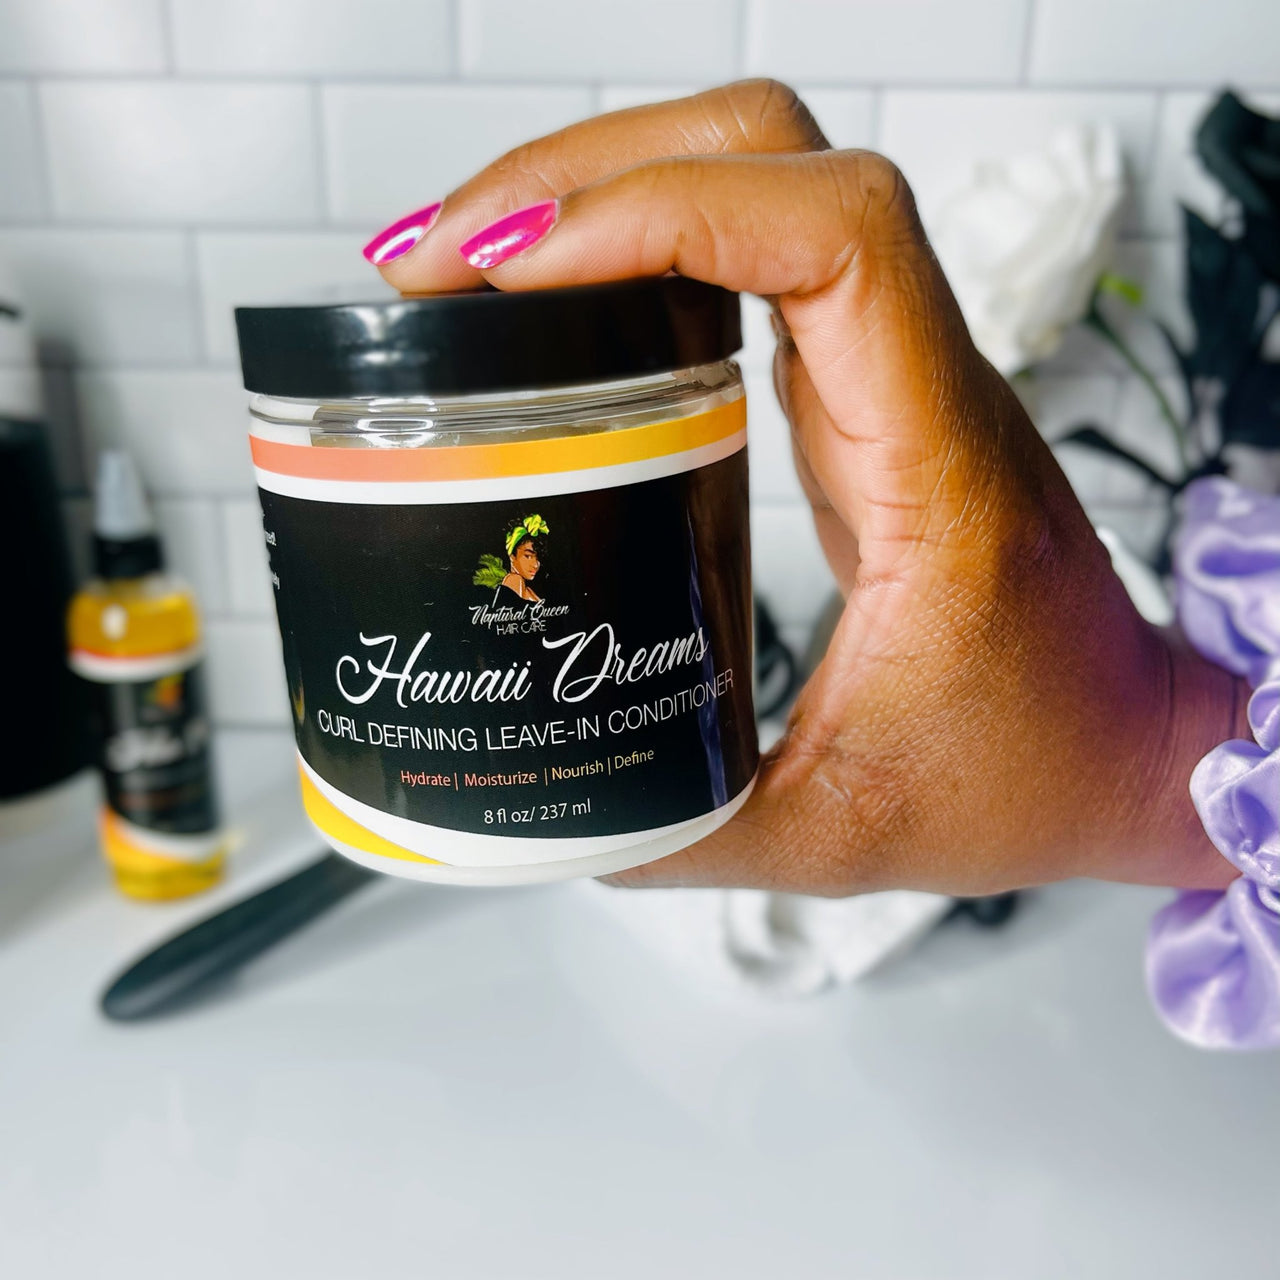 Hawaii Dreams Curl Defining Leave-in Conditioner - Naptural Queen Hair Care